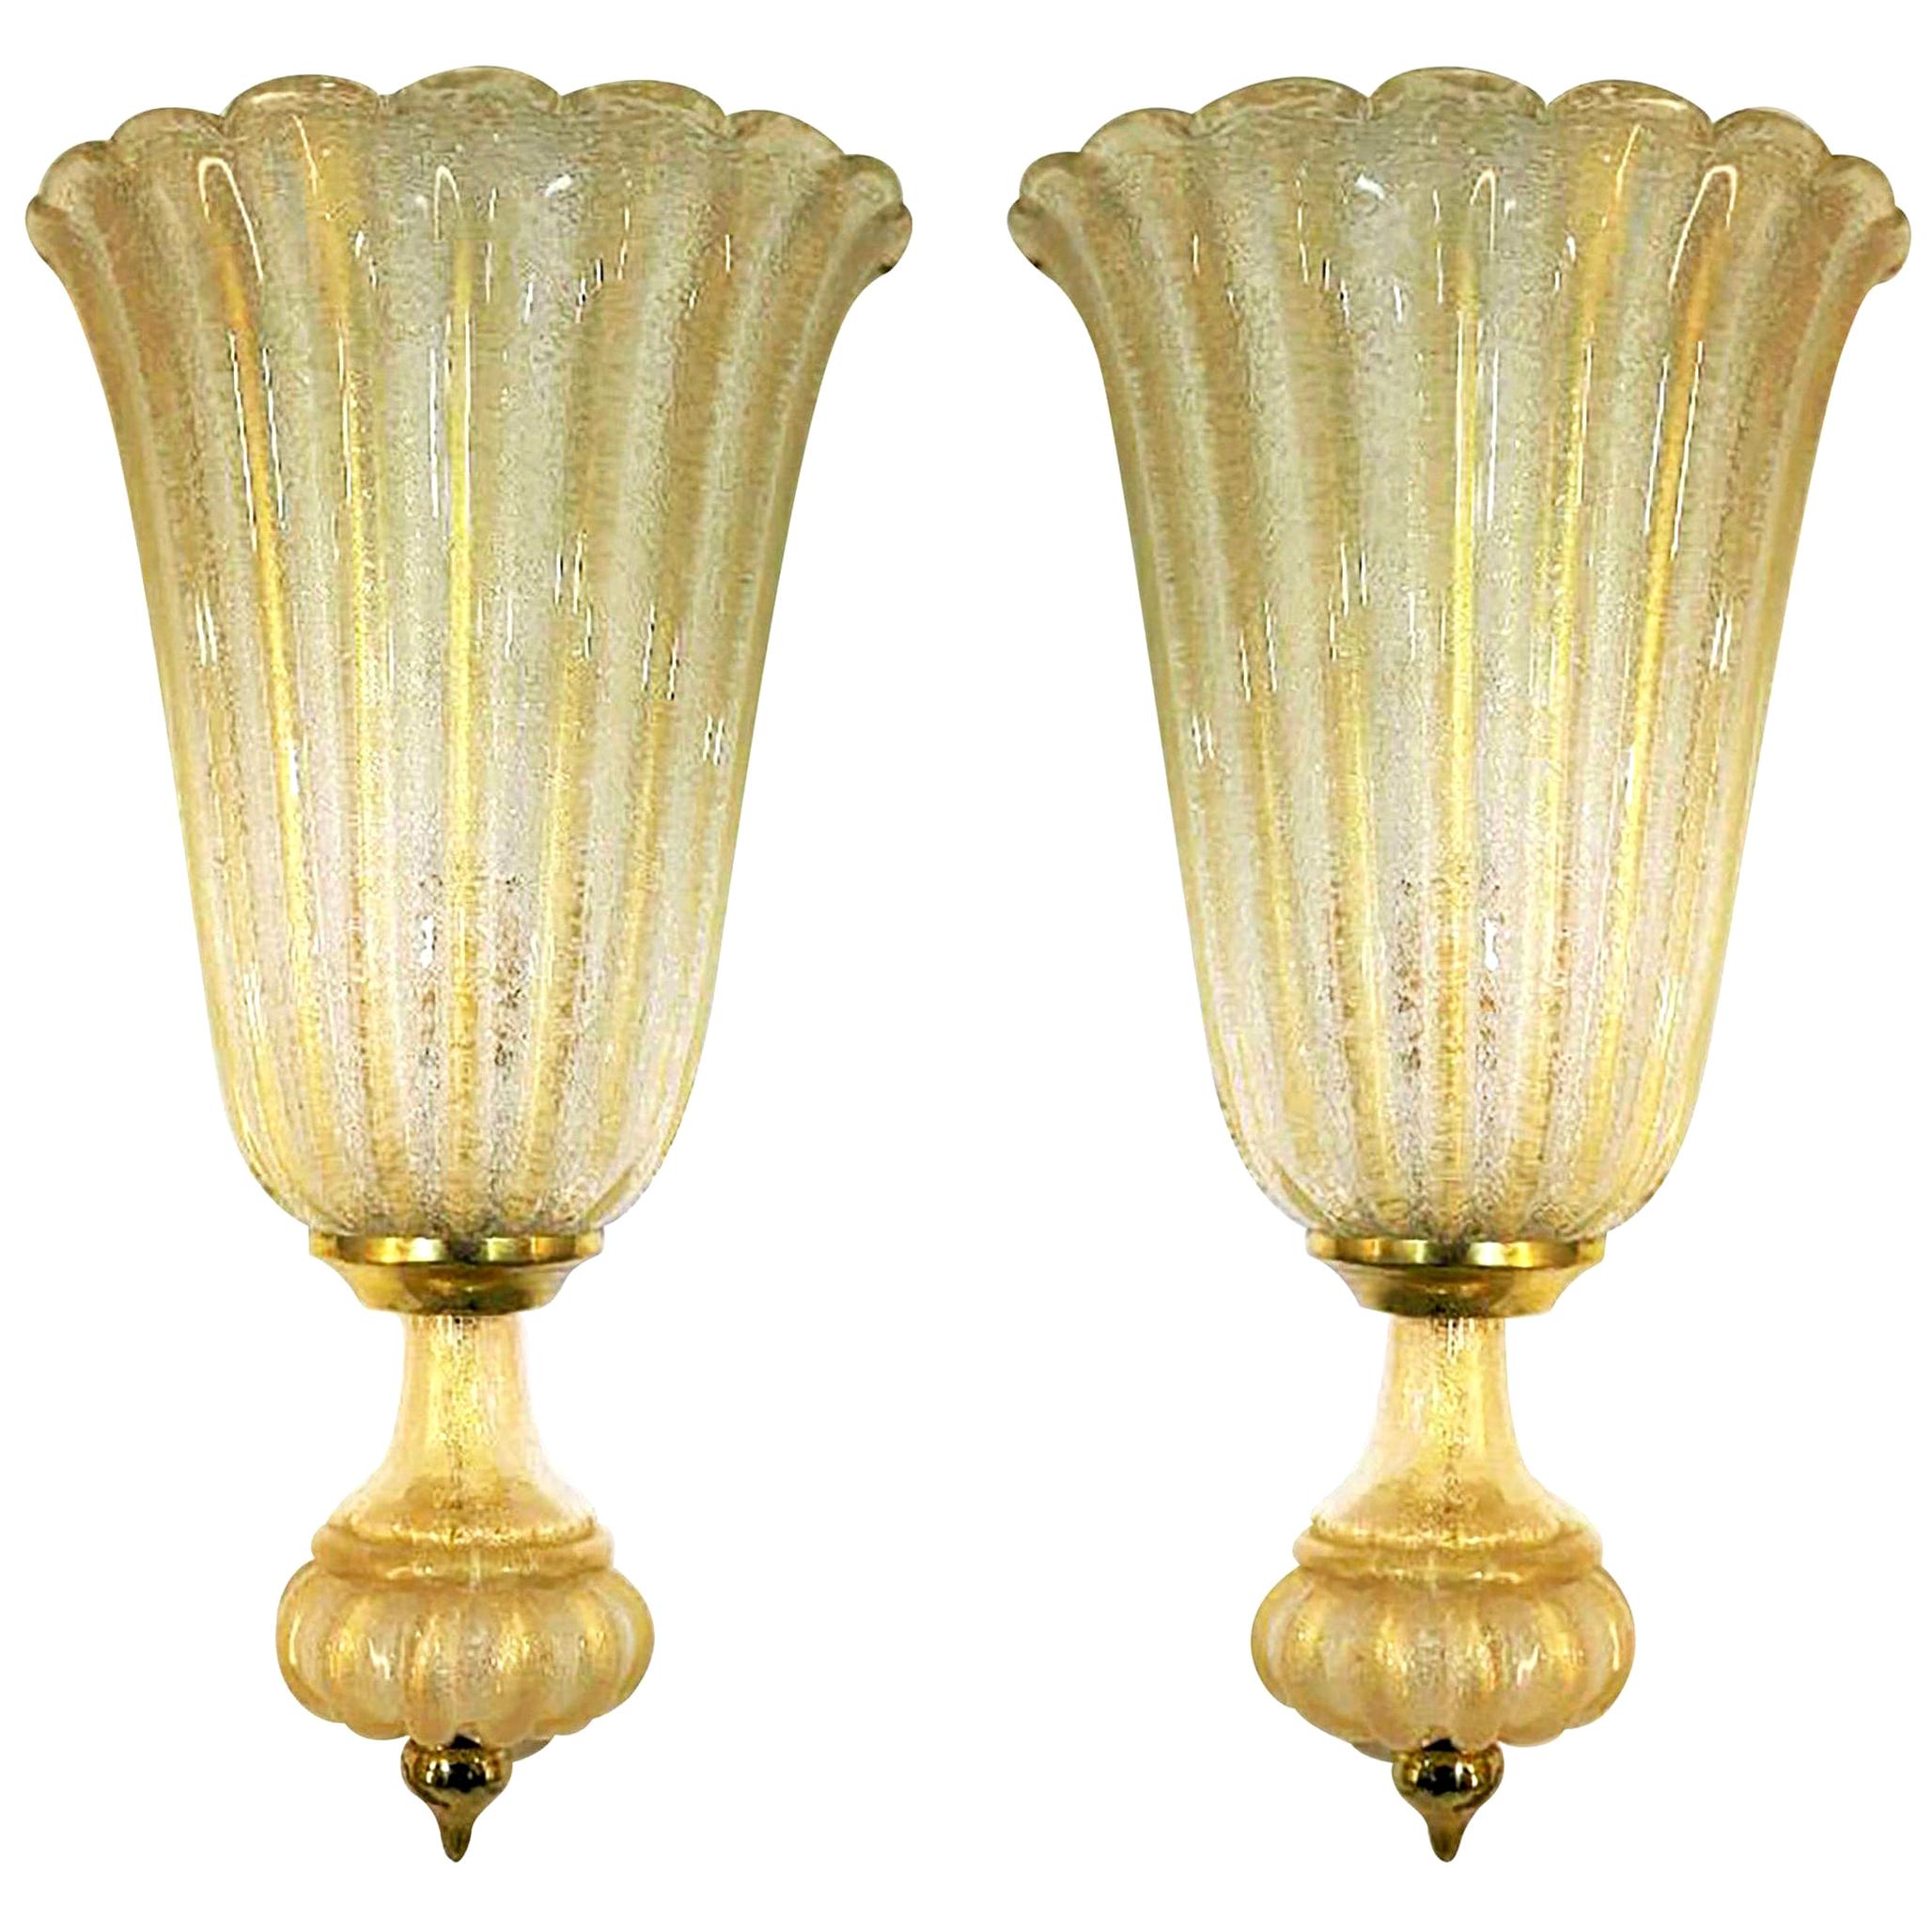 Pair of Extra Large Barovier & Toso Wall Lights with Label